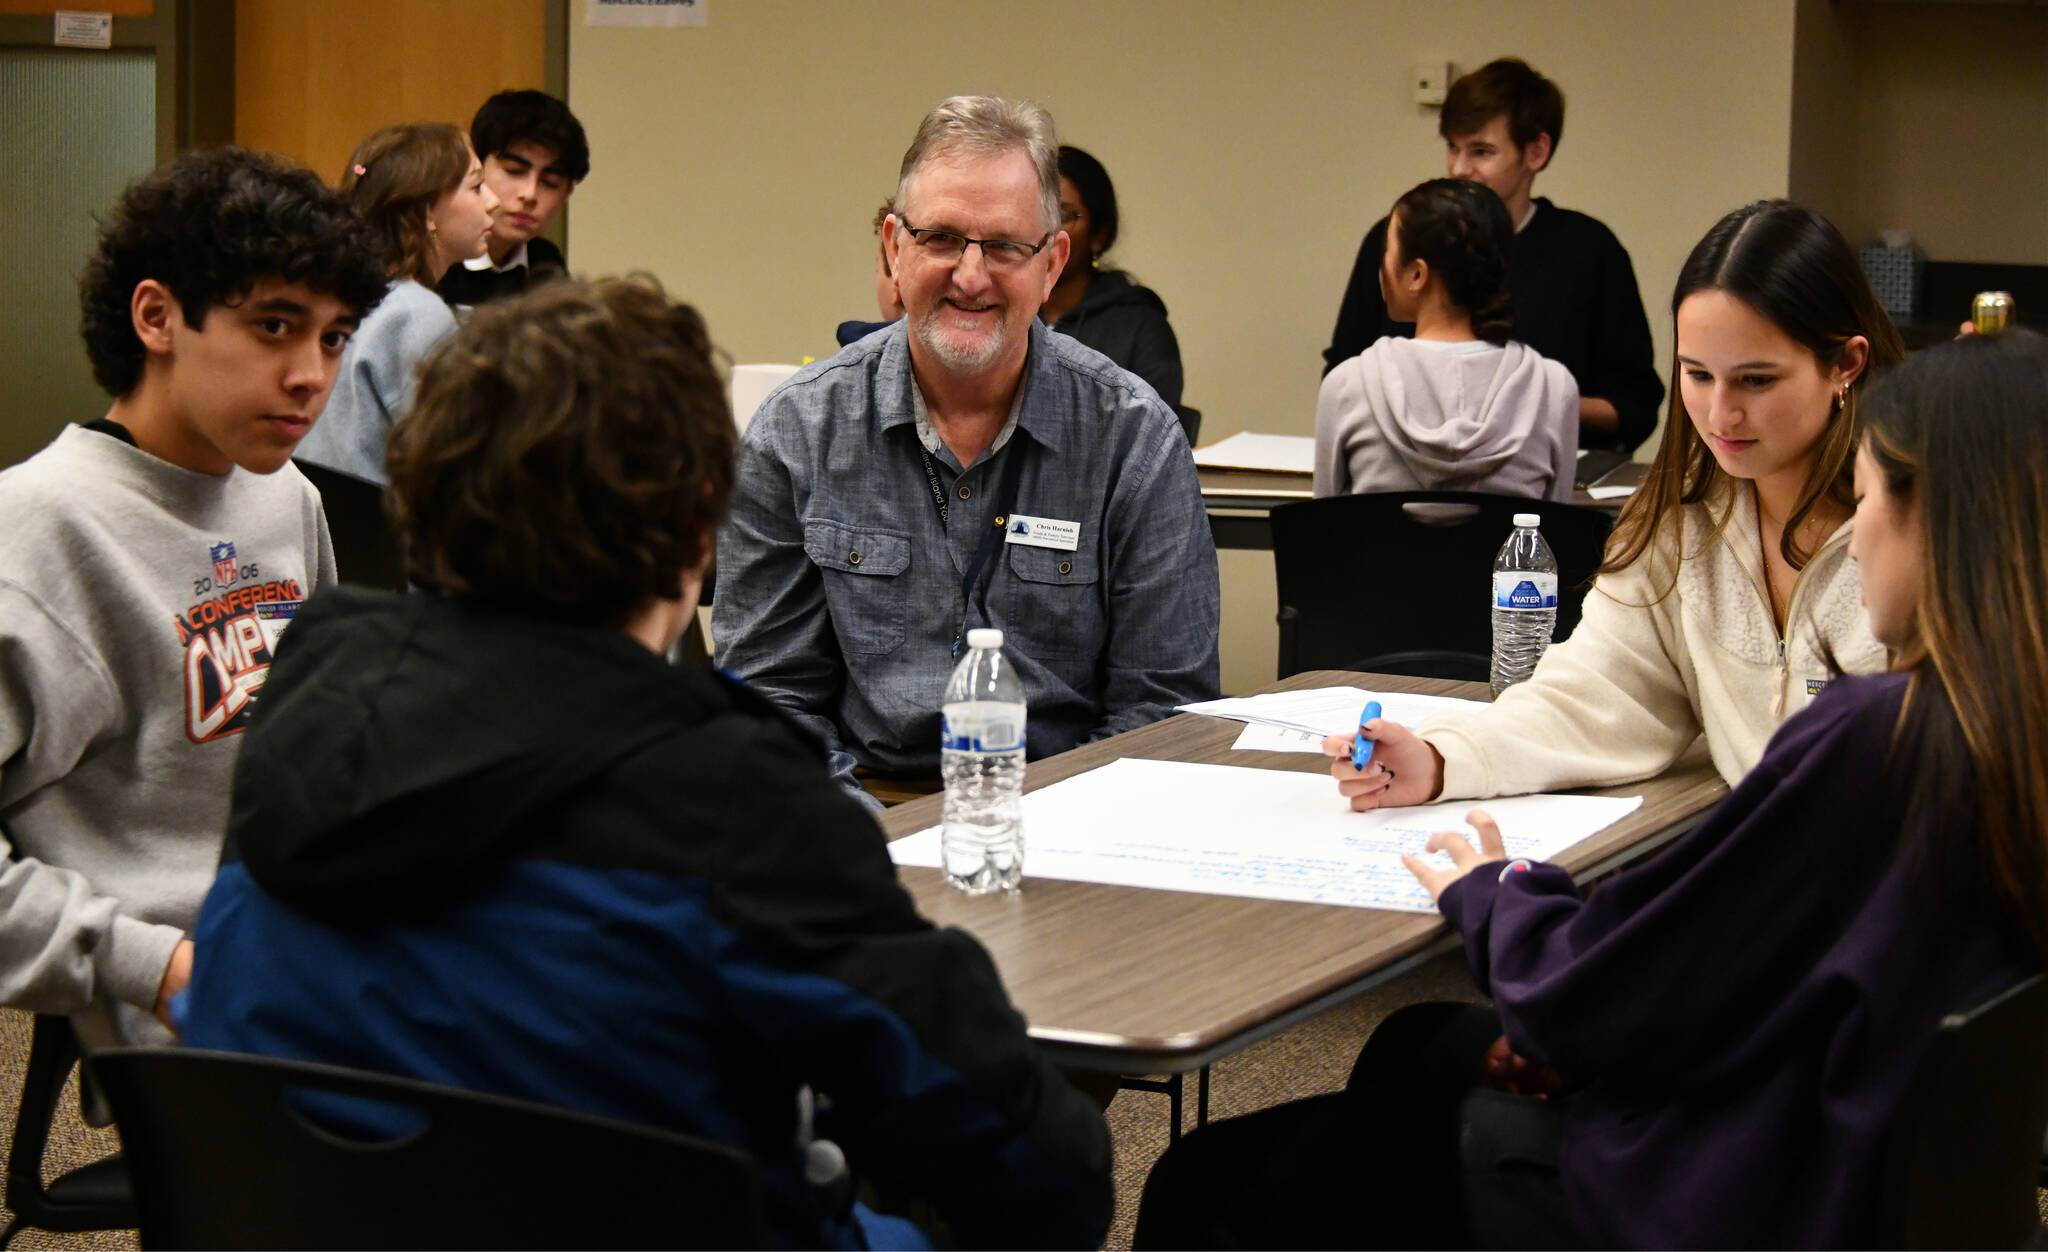 Mercer Island Youth and Family Services Mercer Island High School prevention specialist Chris Harnish, center, interacts with students during a MI Healthy Youth Forum breakout session on Jan. 31 at the Mercer Island Community and Event Center. Andy Nystrom/ staff photo